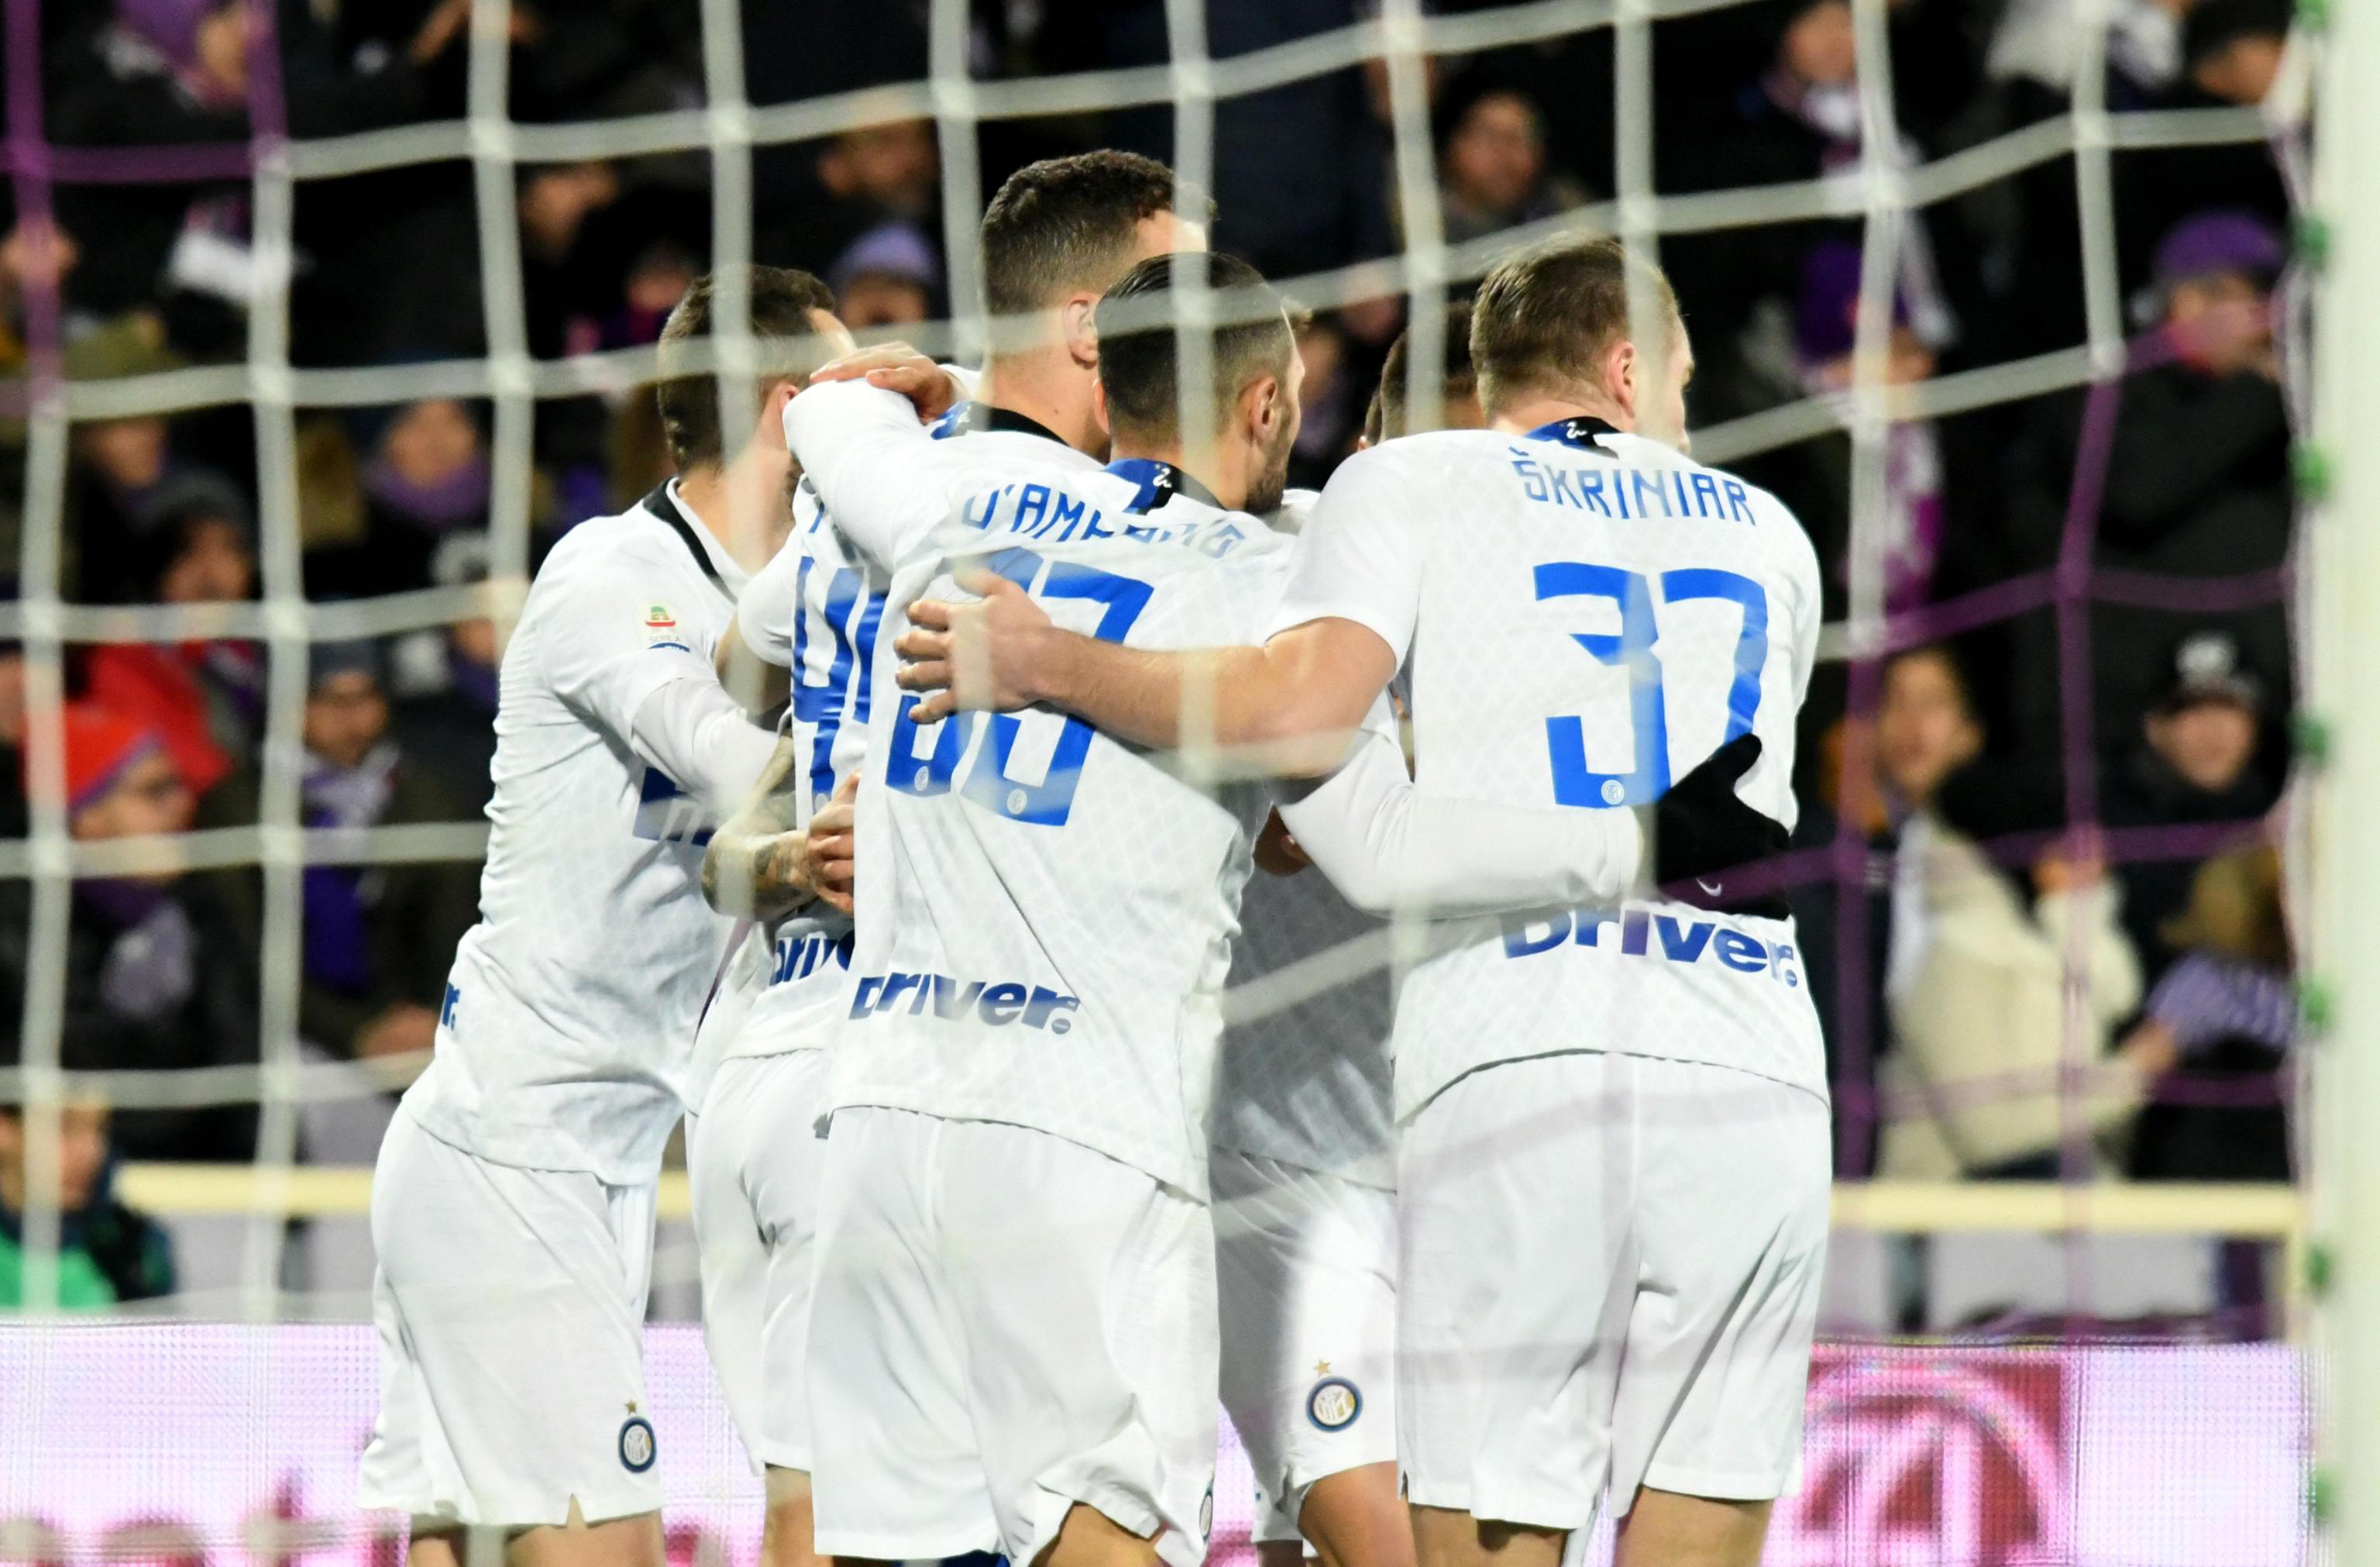 epa07393885 Inter's defender Matias Vecino celebrates with his teammates after scoring during the Italian Serie A soccer match between ACF Fiorentina and FC Inter at the Artemio Franchi stadium in Florence, Italy, 24 February 2019.  EPA/Claudio Giovannini